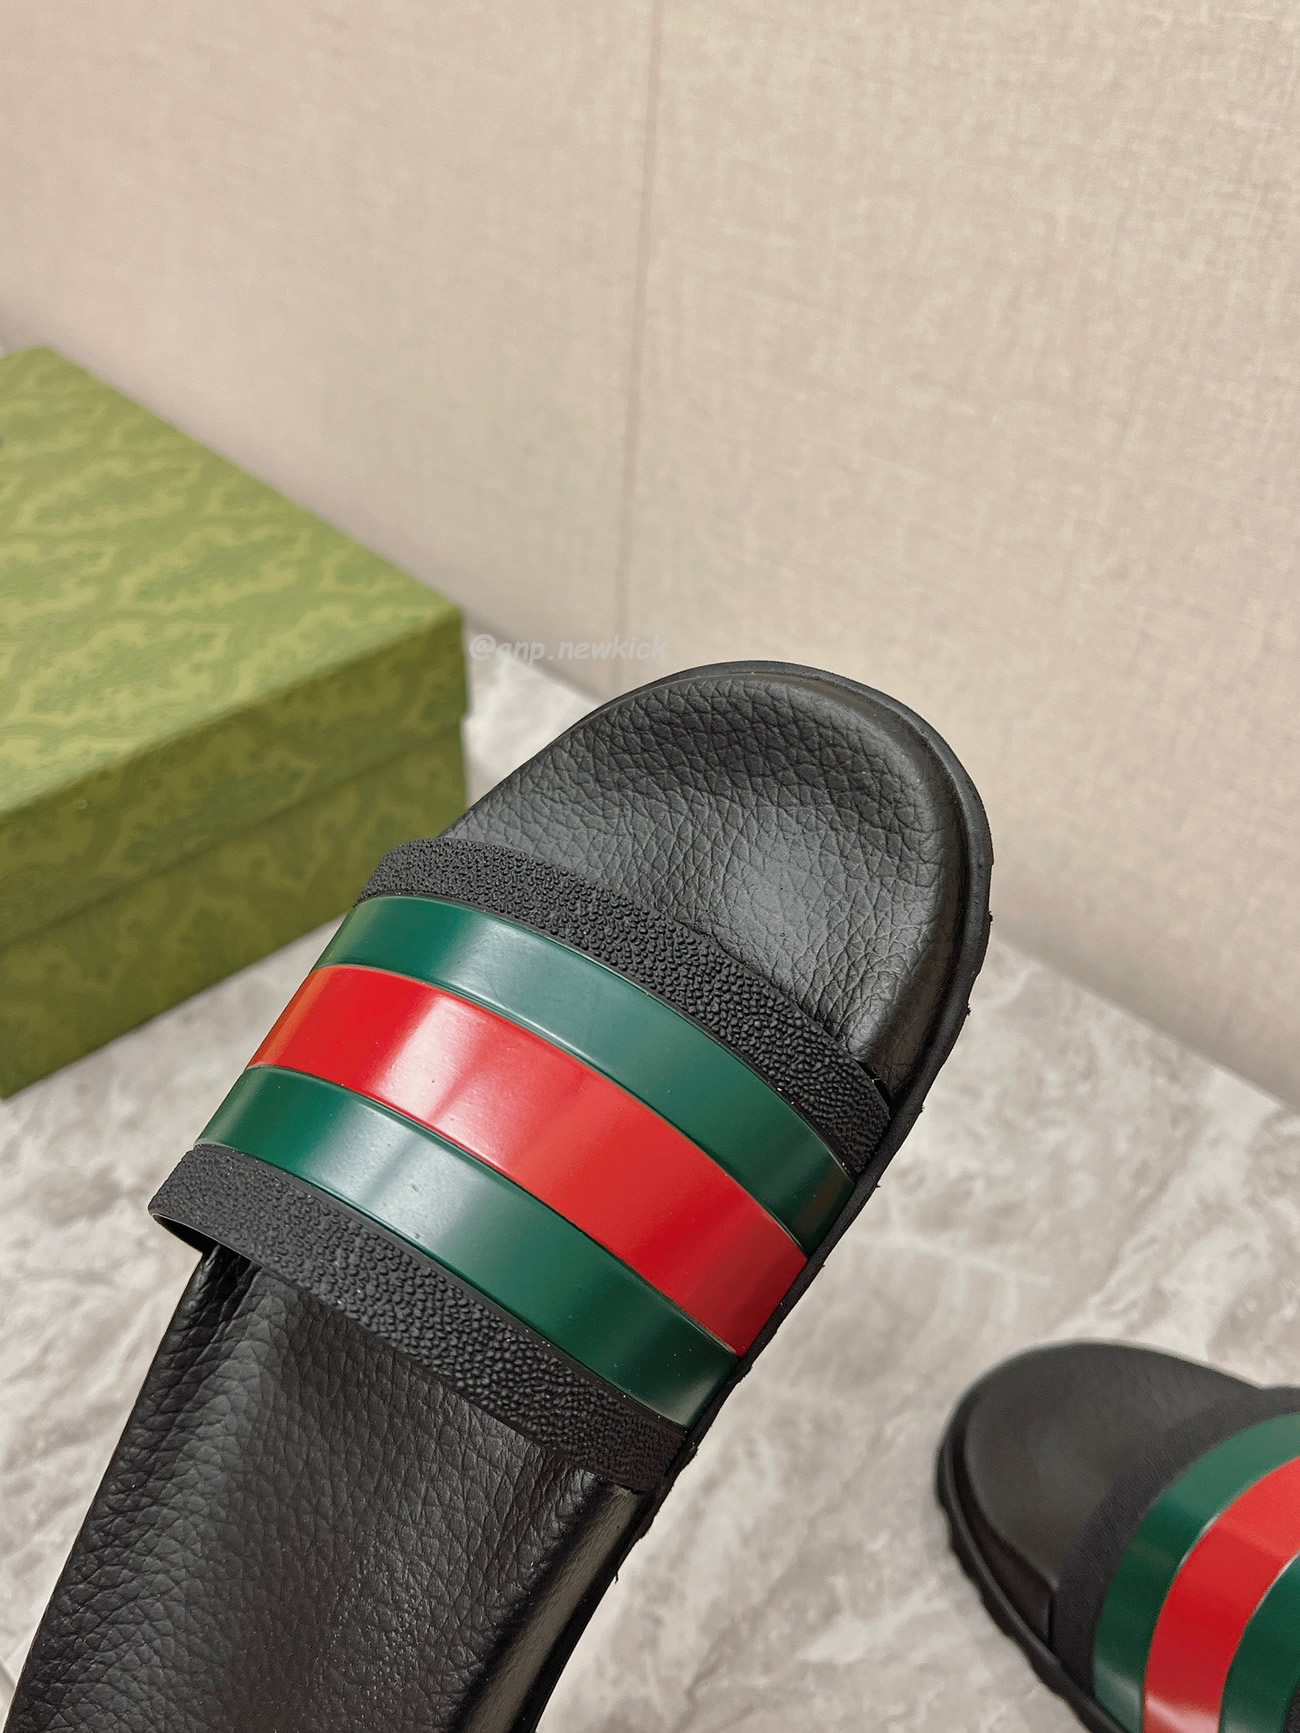 Gucci Mens Woven Leather Sandals 429469 Gib10 1098 (11) - newkick.org